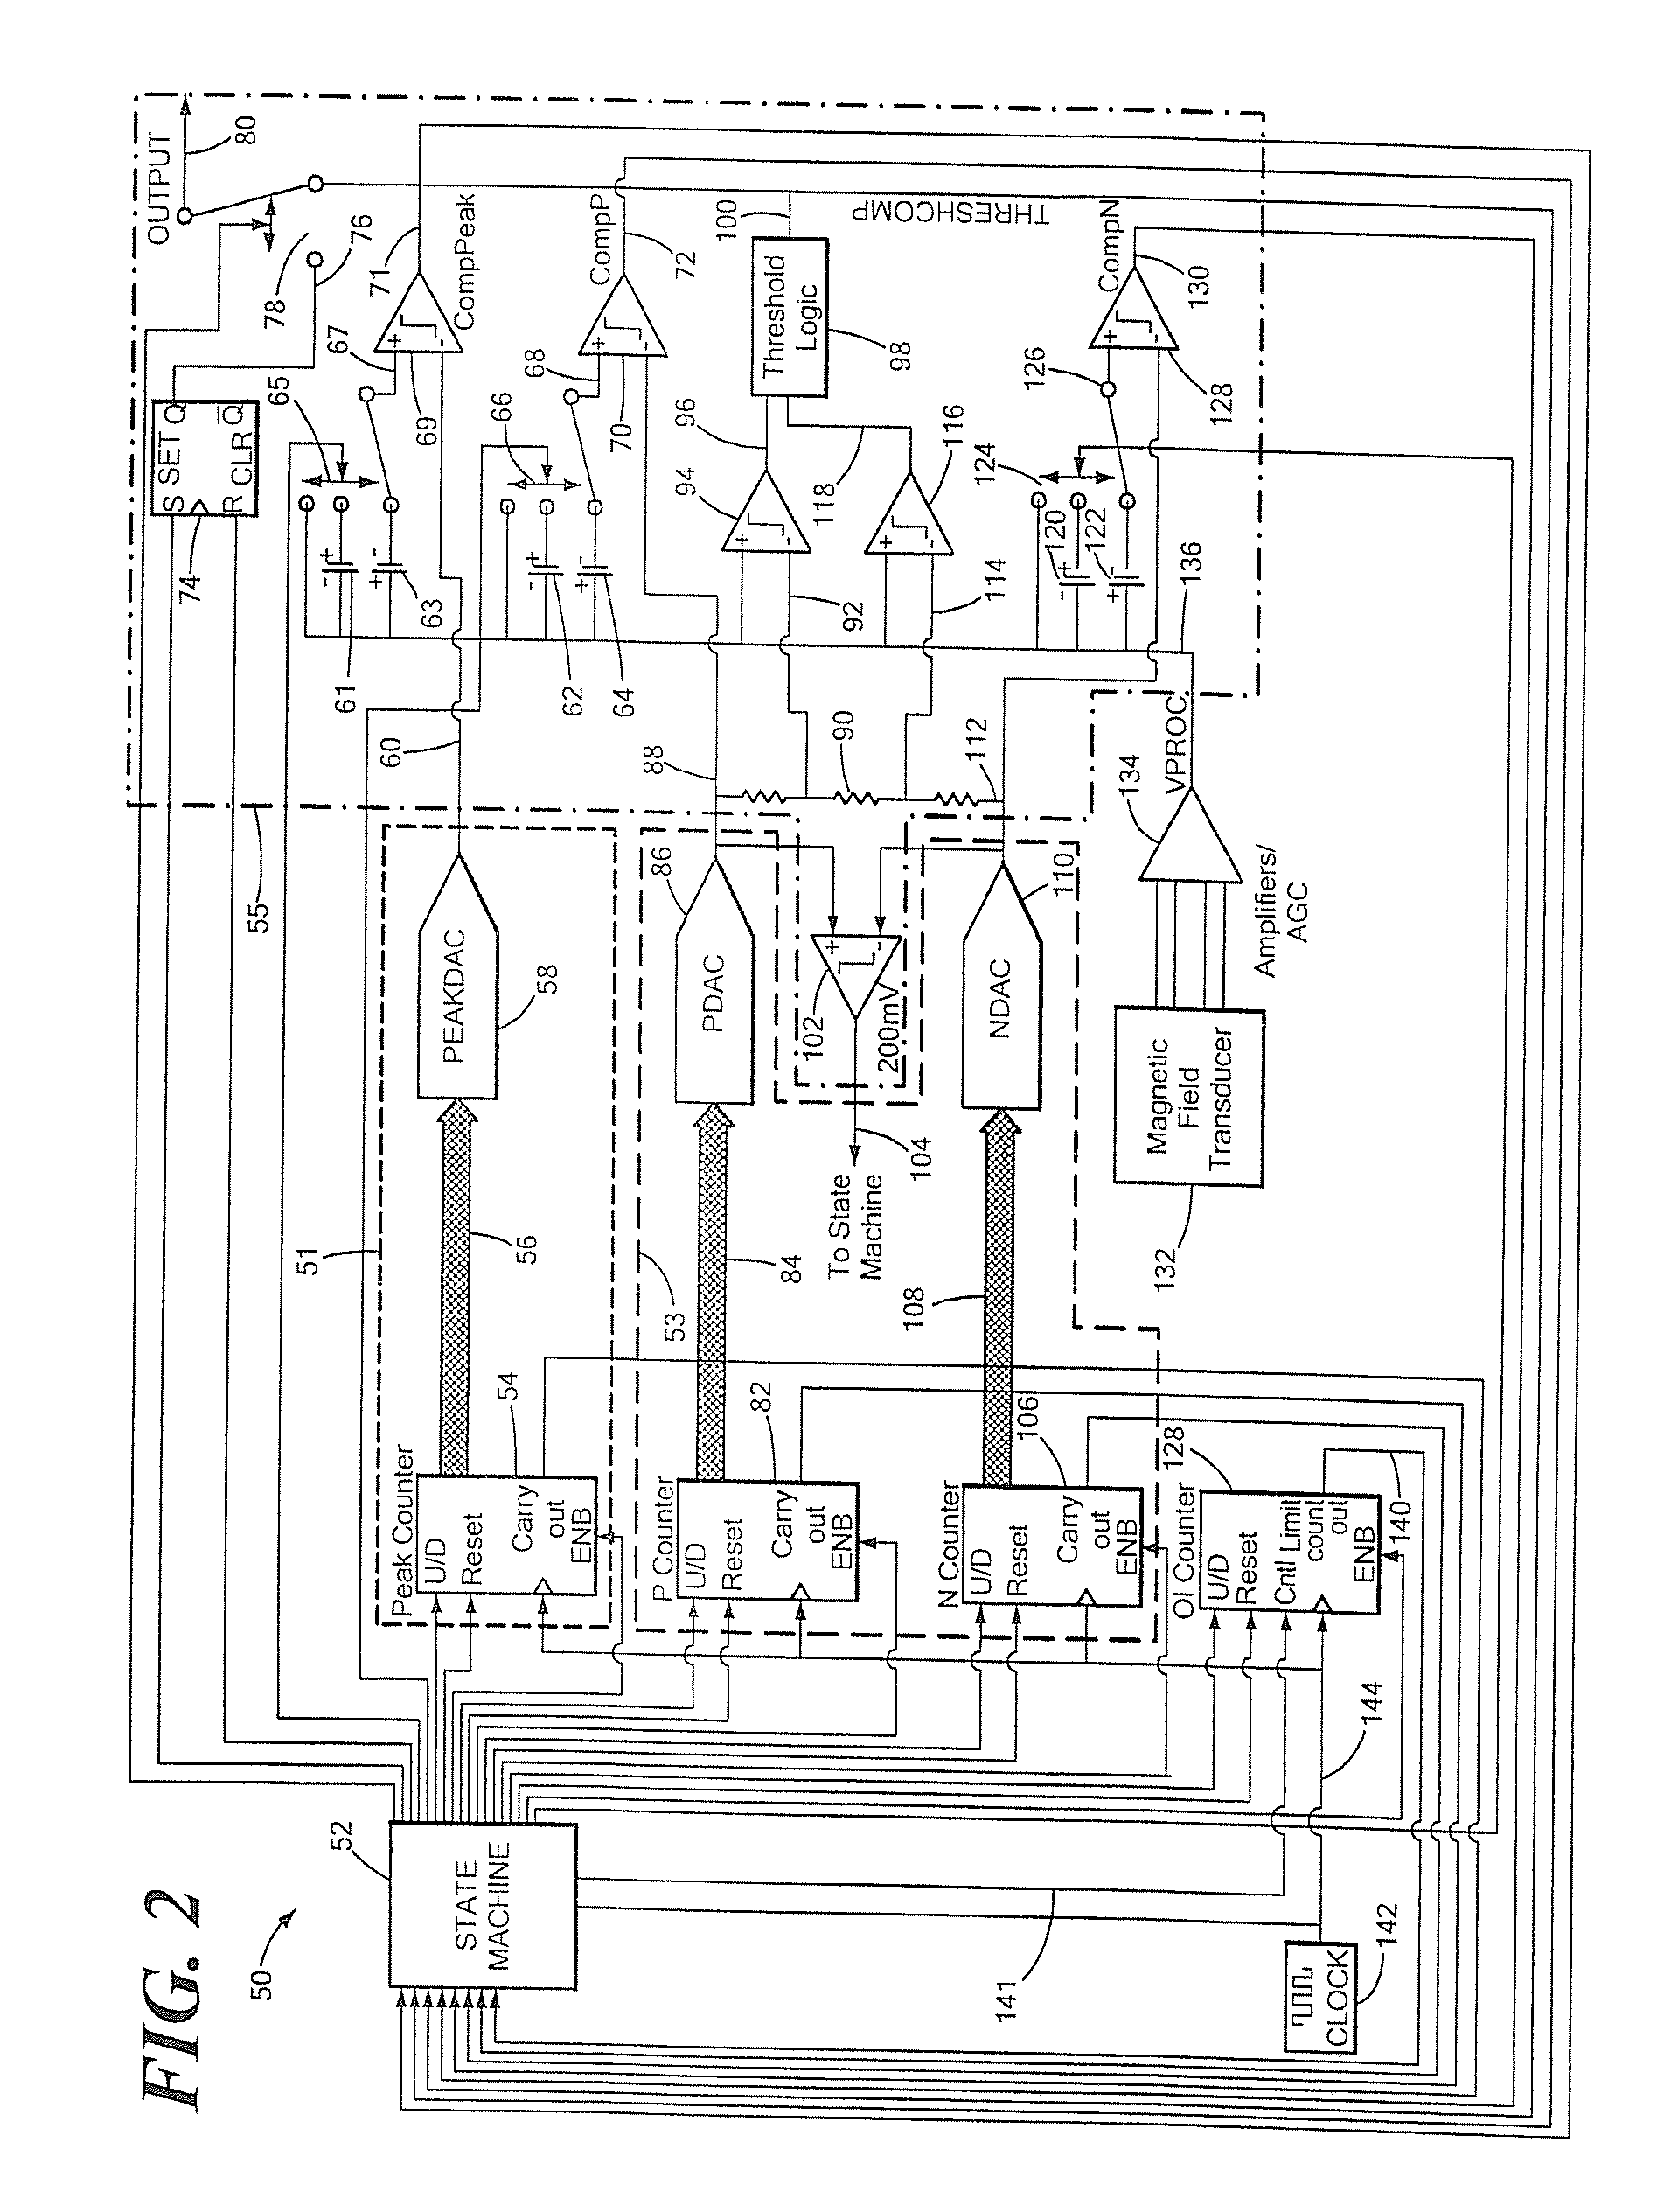 Calibration circuits and methods for a proximity detector using a first rotation detector for a determined time period and a second rotation detector after the determined time period